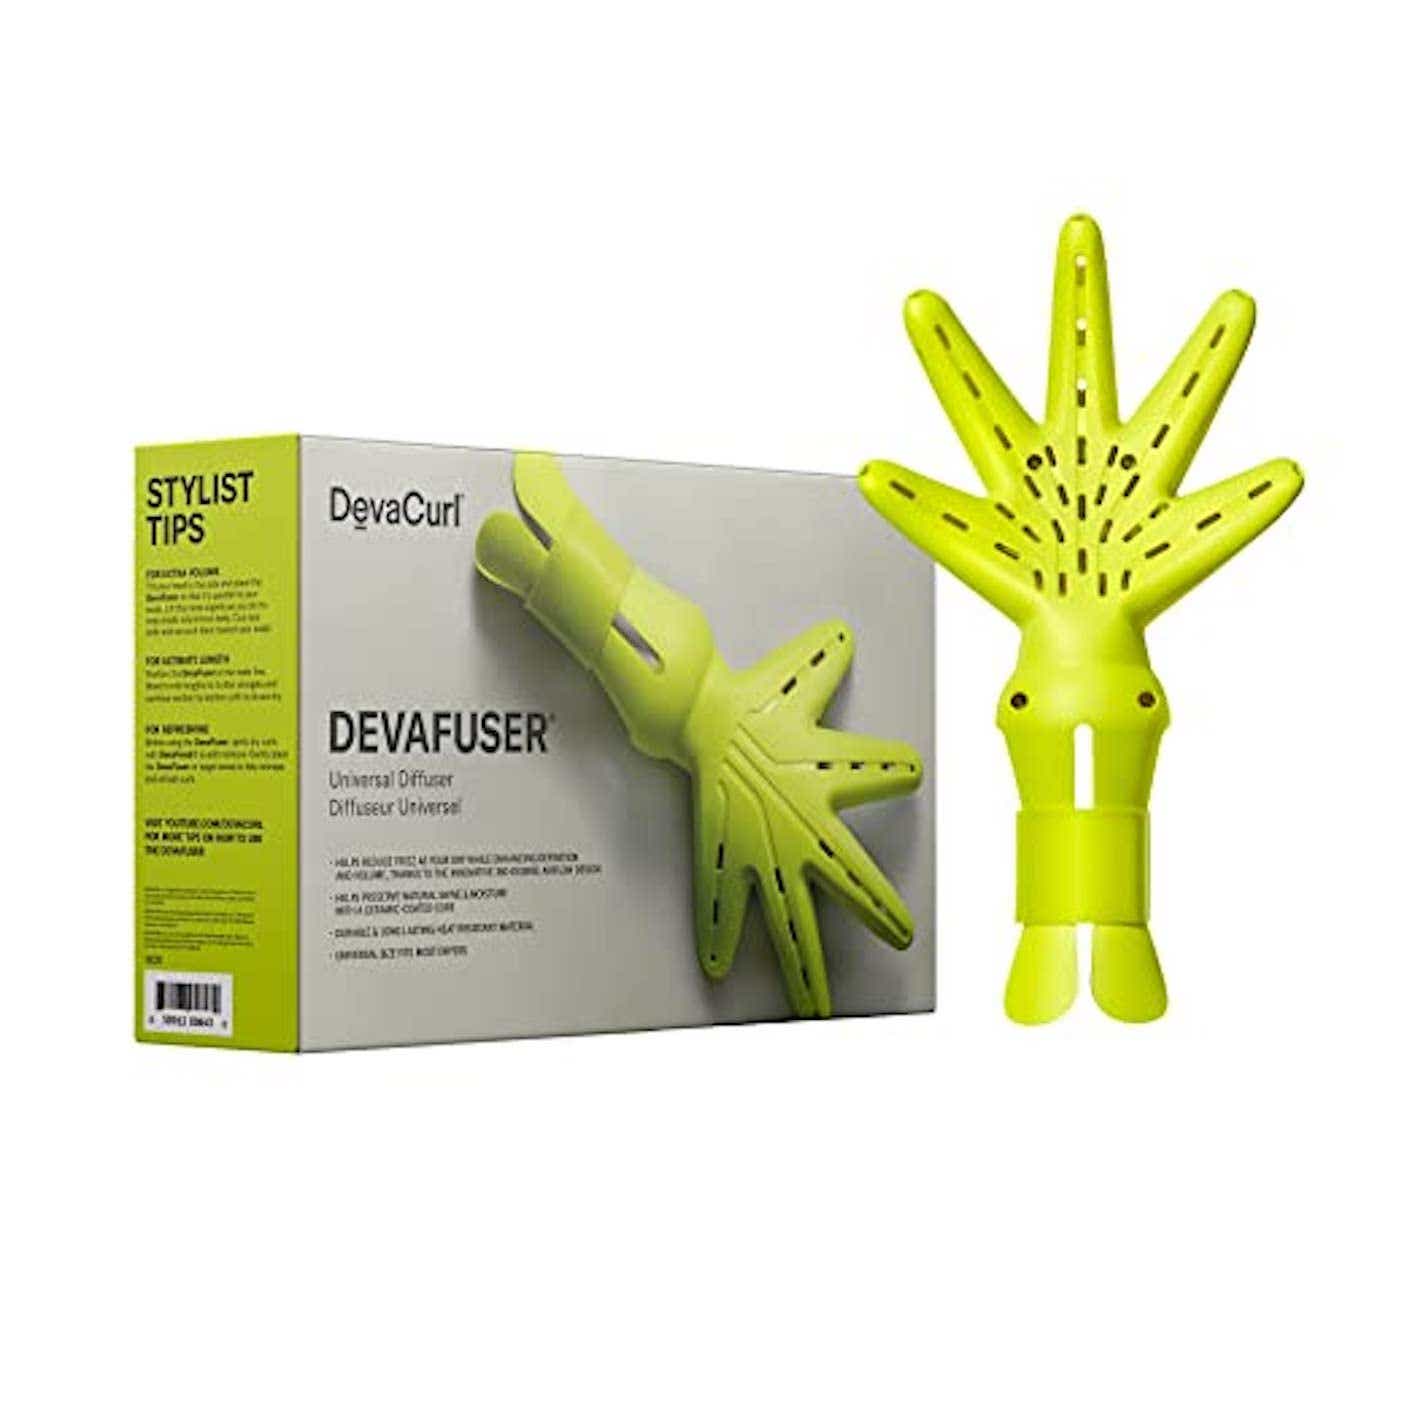 A bright green, diffusing hair dryer attachment shaped like a hand sits next to its packaging.